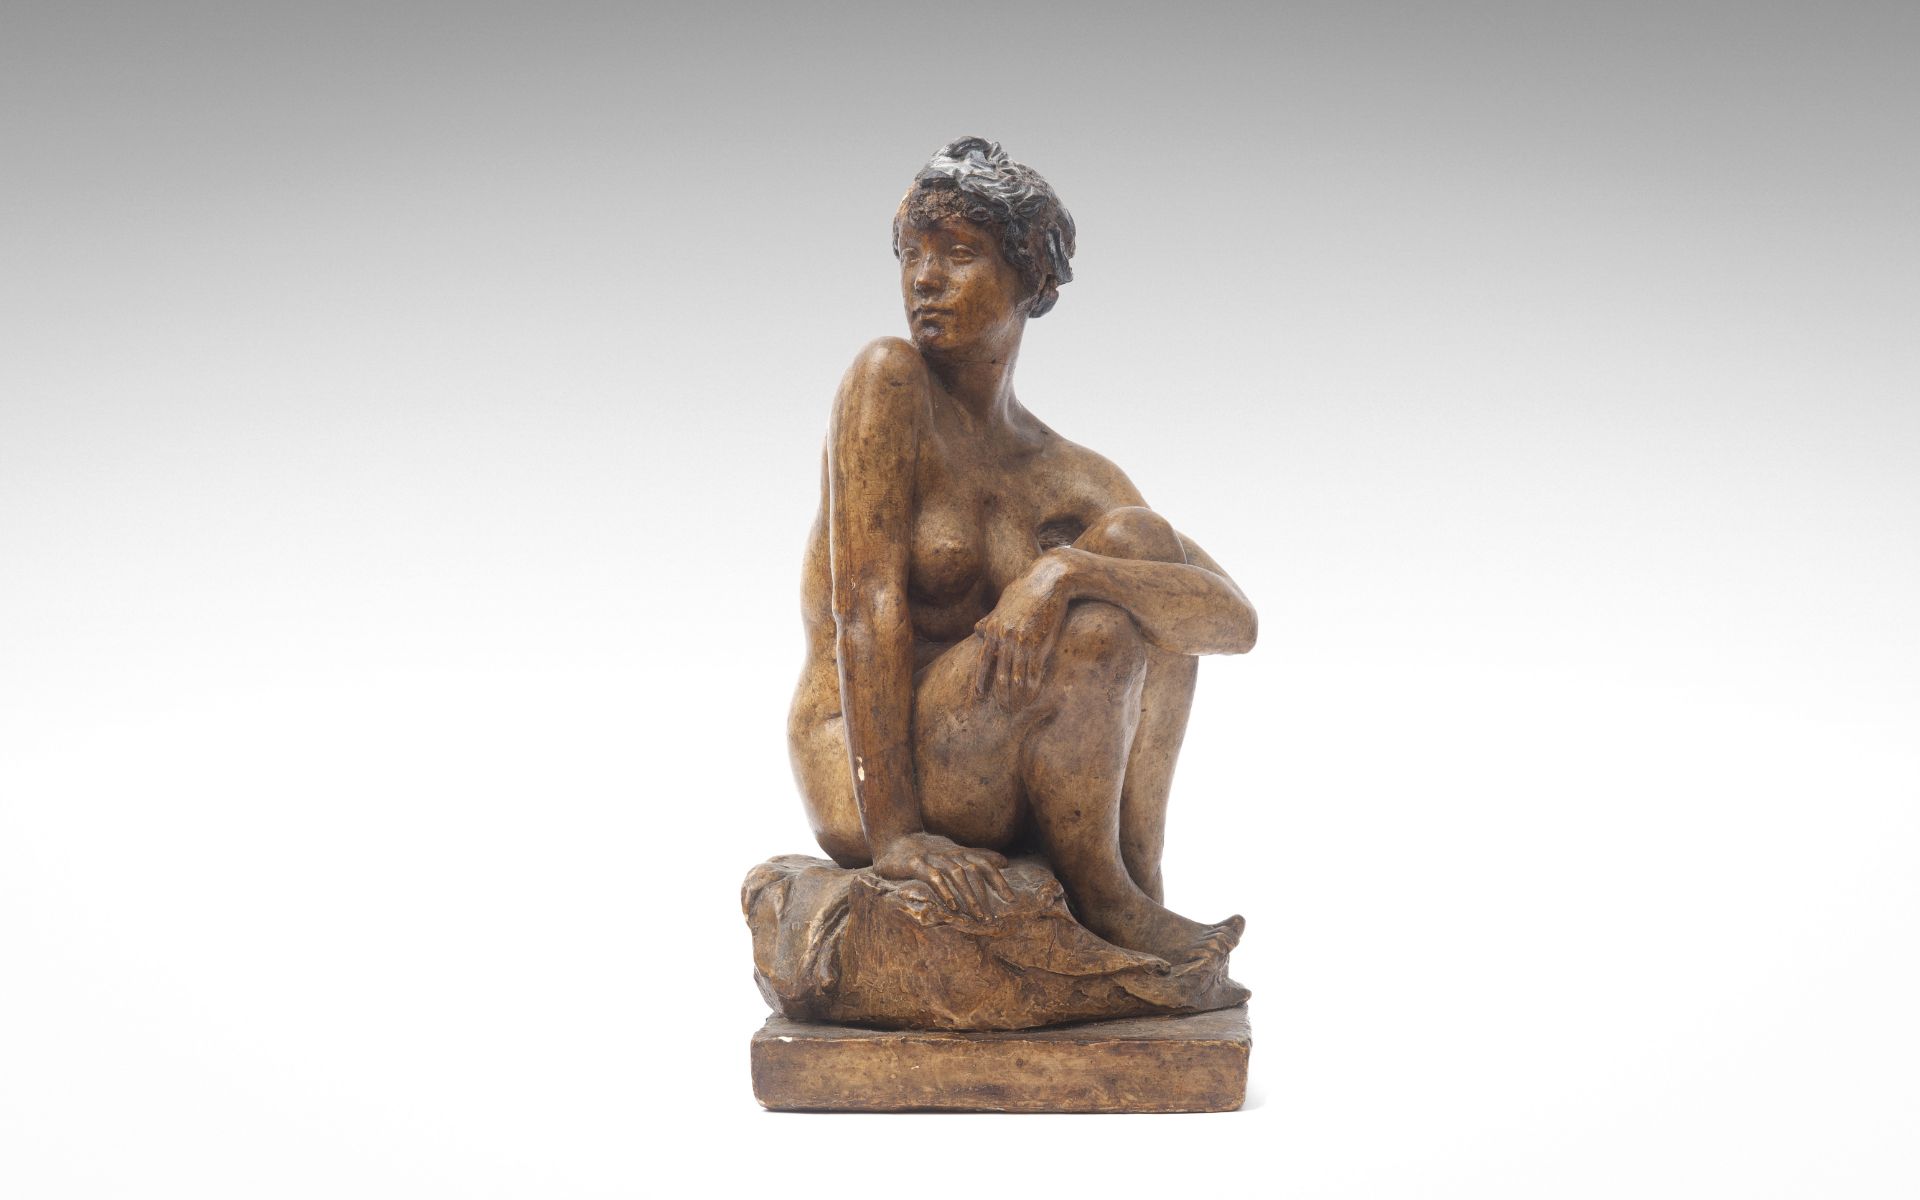 SIR WILLIAM REID DICK R.A. (BRITISH, 1879-1961): A PLASTER MAQUETTE OF A SEATED NUDE